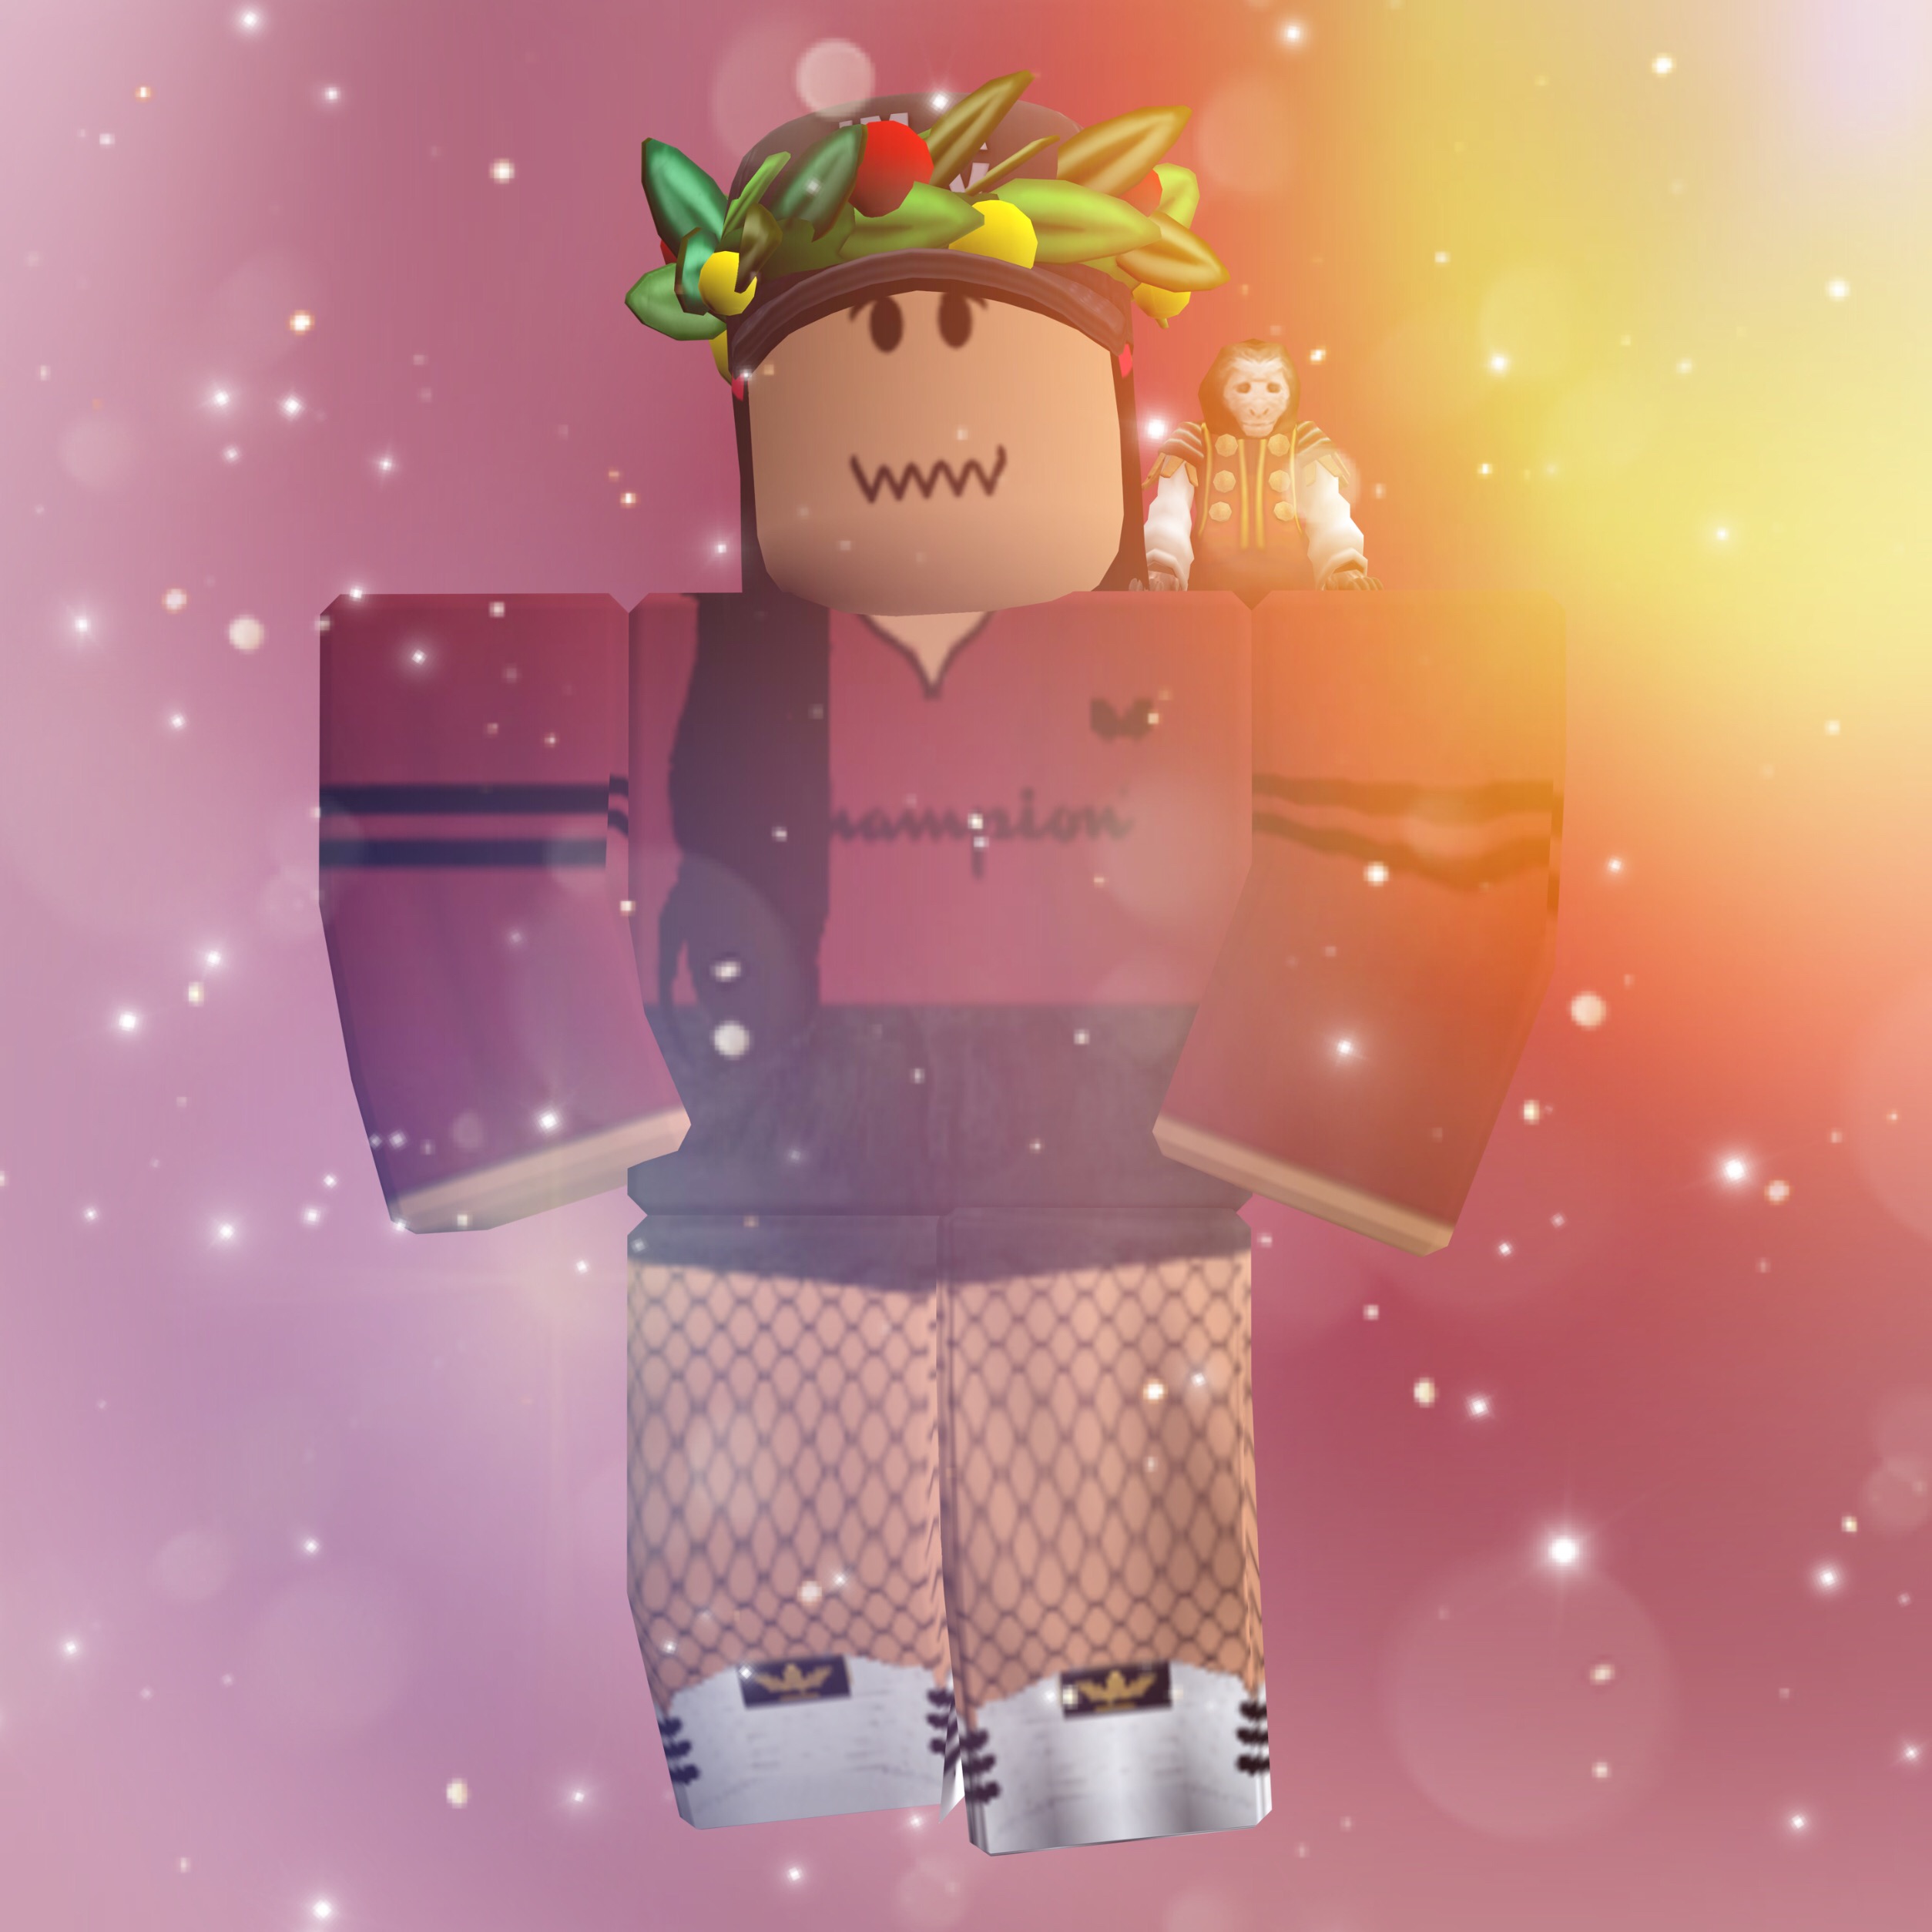 Cute Roblox Bios Copy And Paste - How I Edit My Roblox Pictures ...